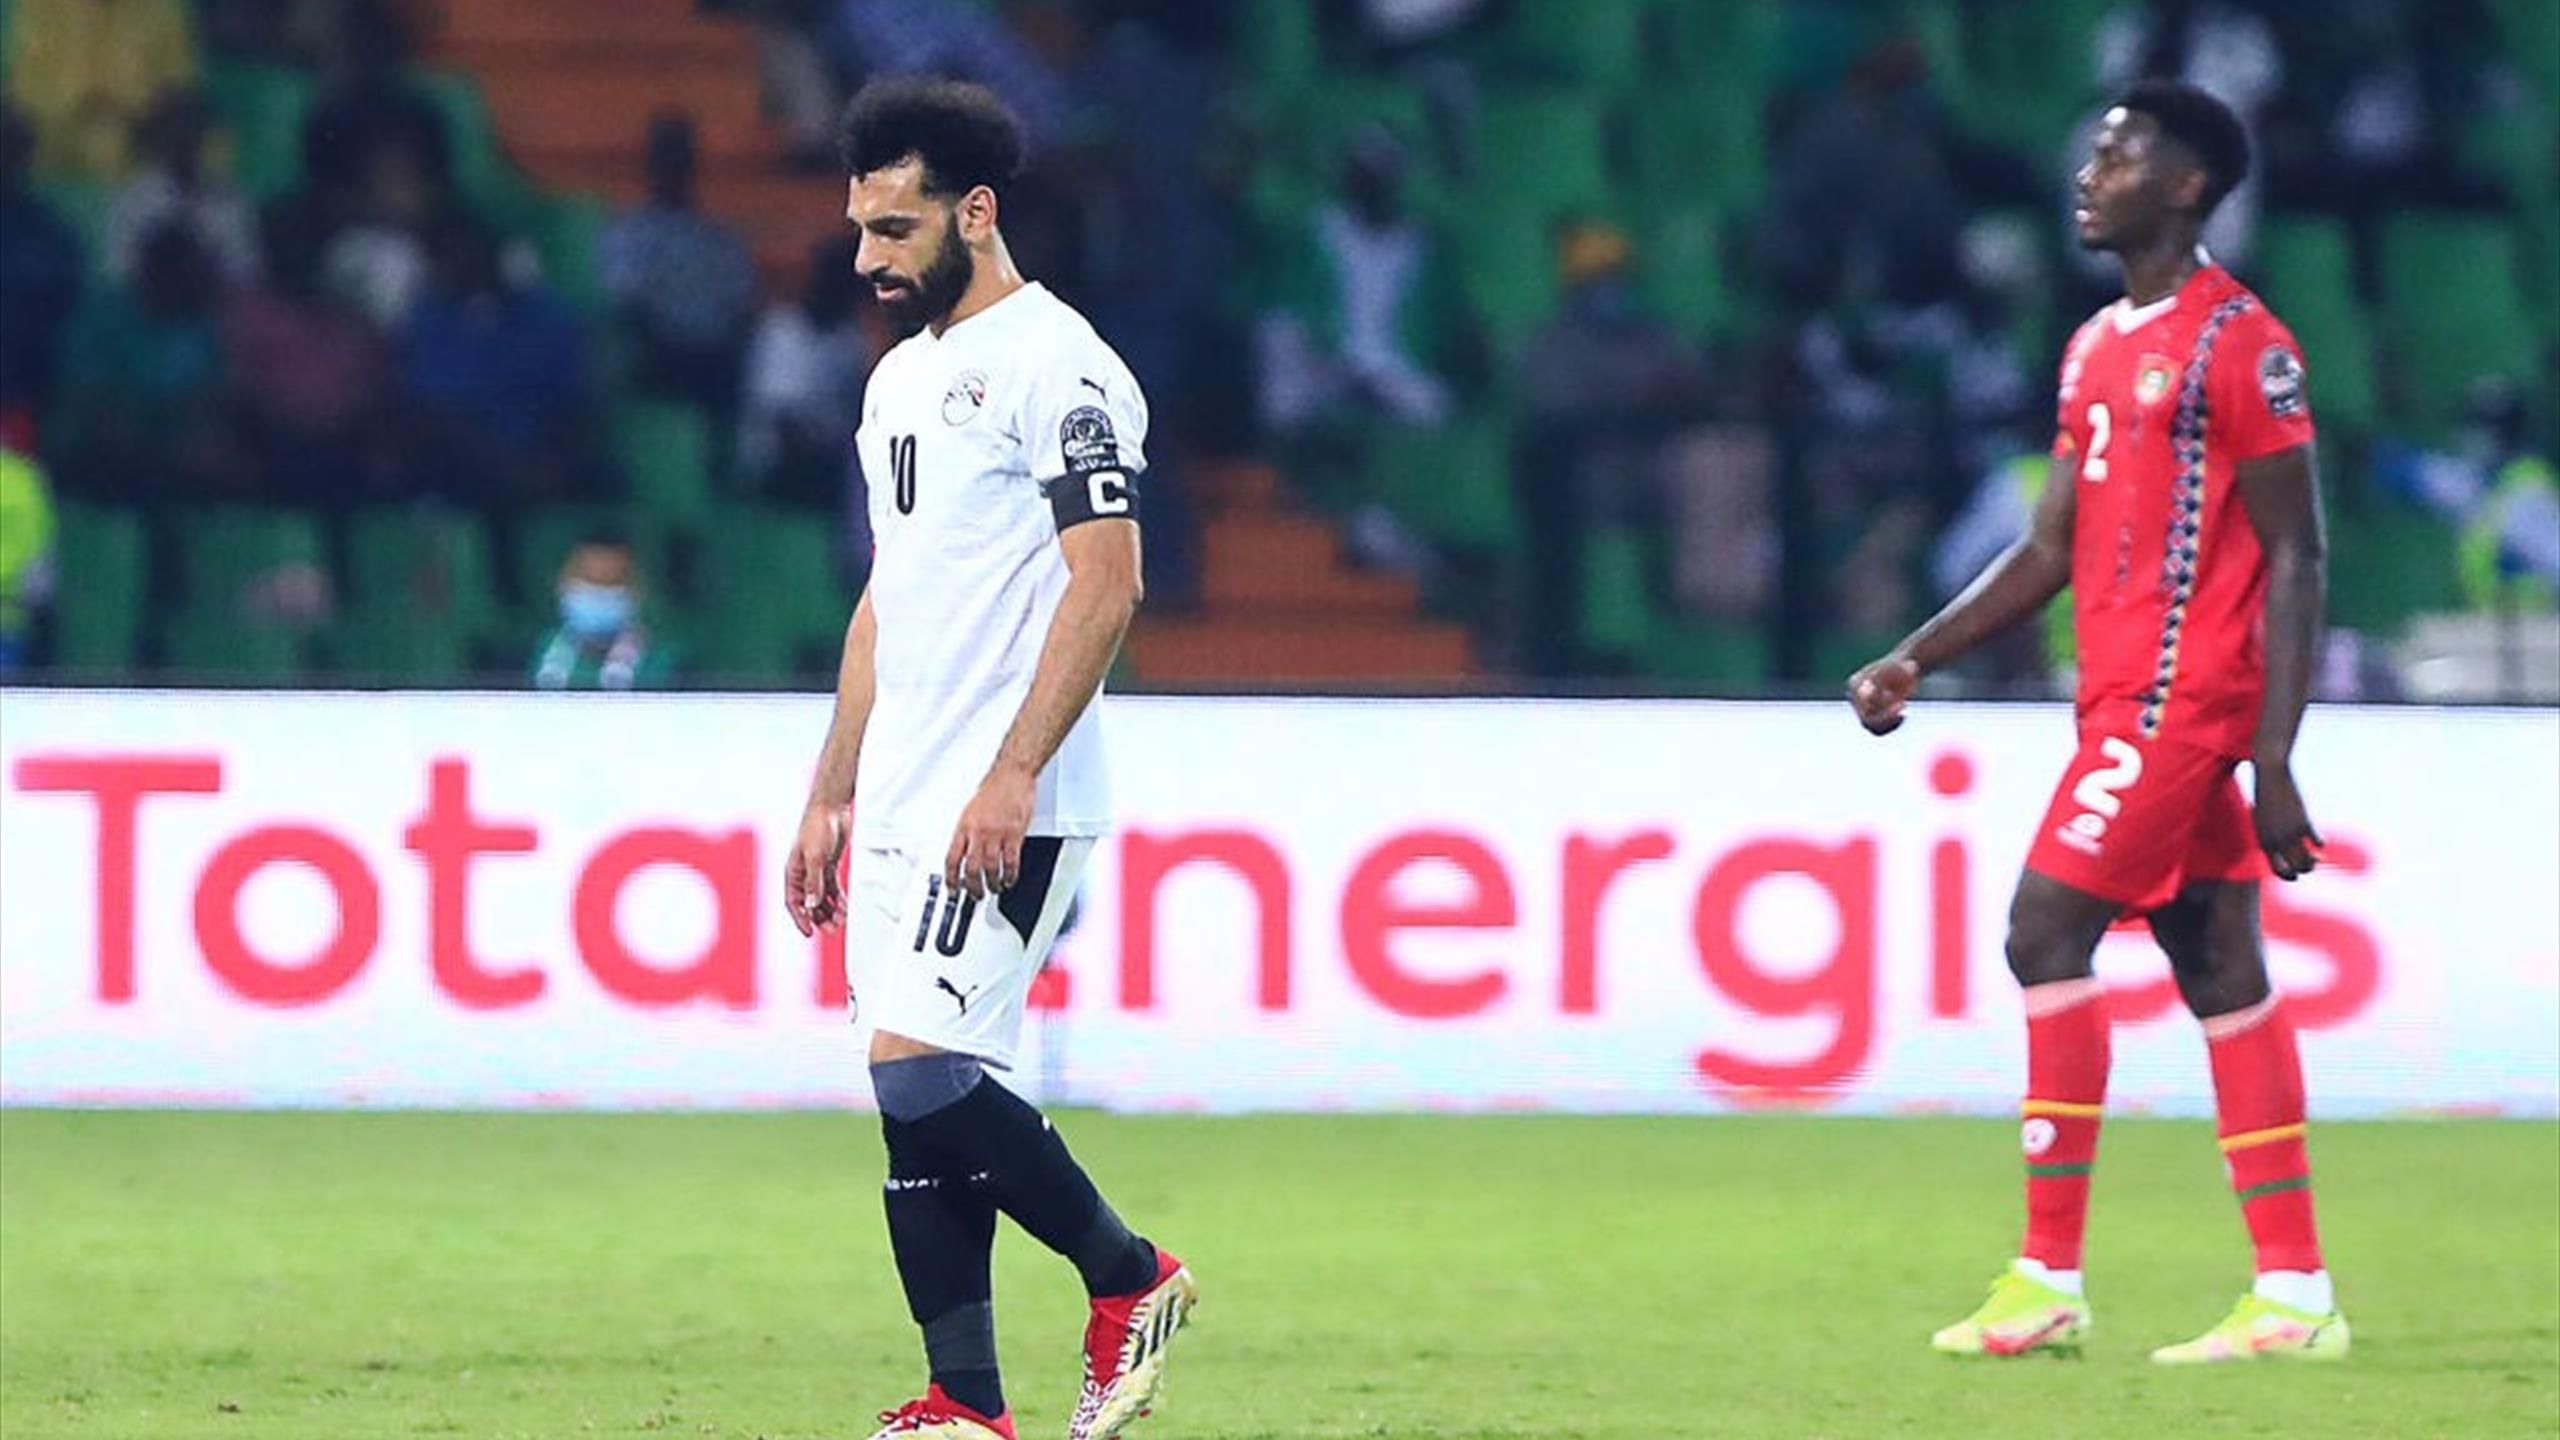 Mo Salah volley gives Egypt hope of AFCON knockout round with winning goal over Guinea-Bissau